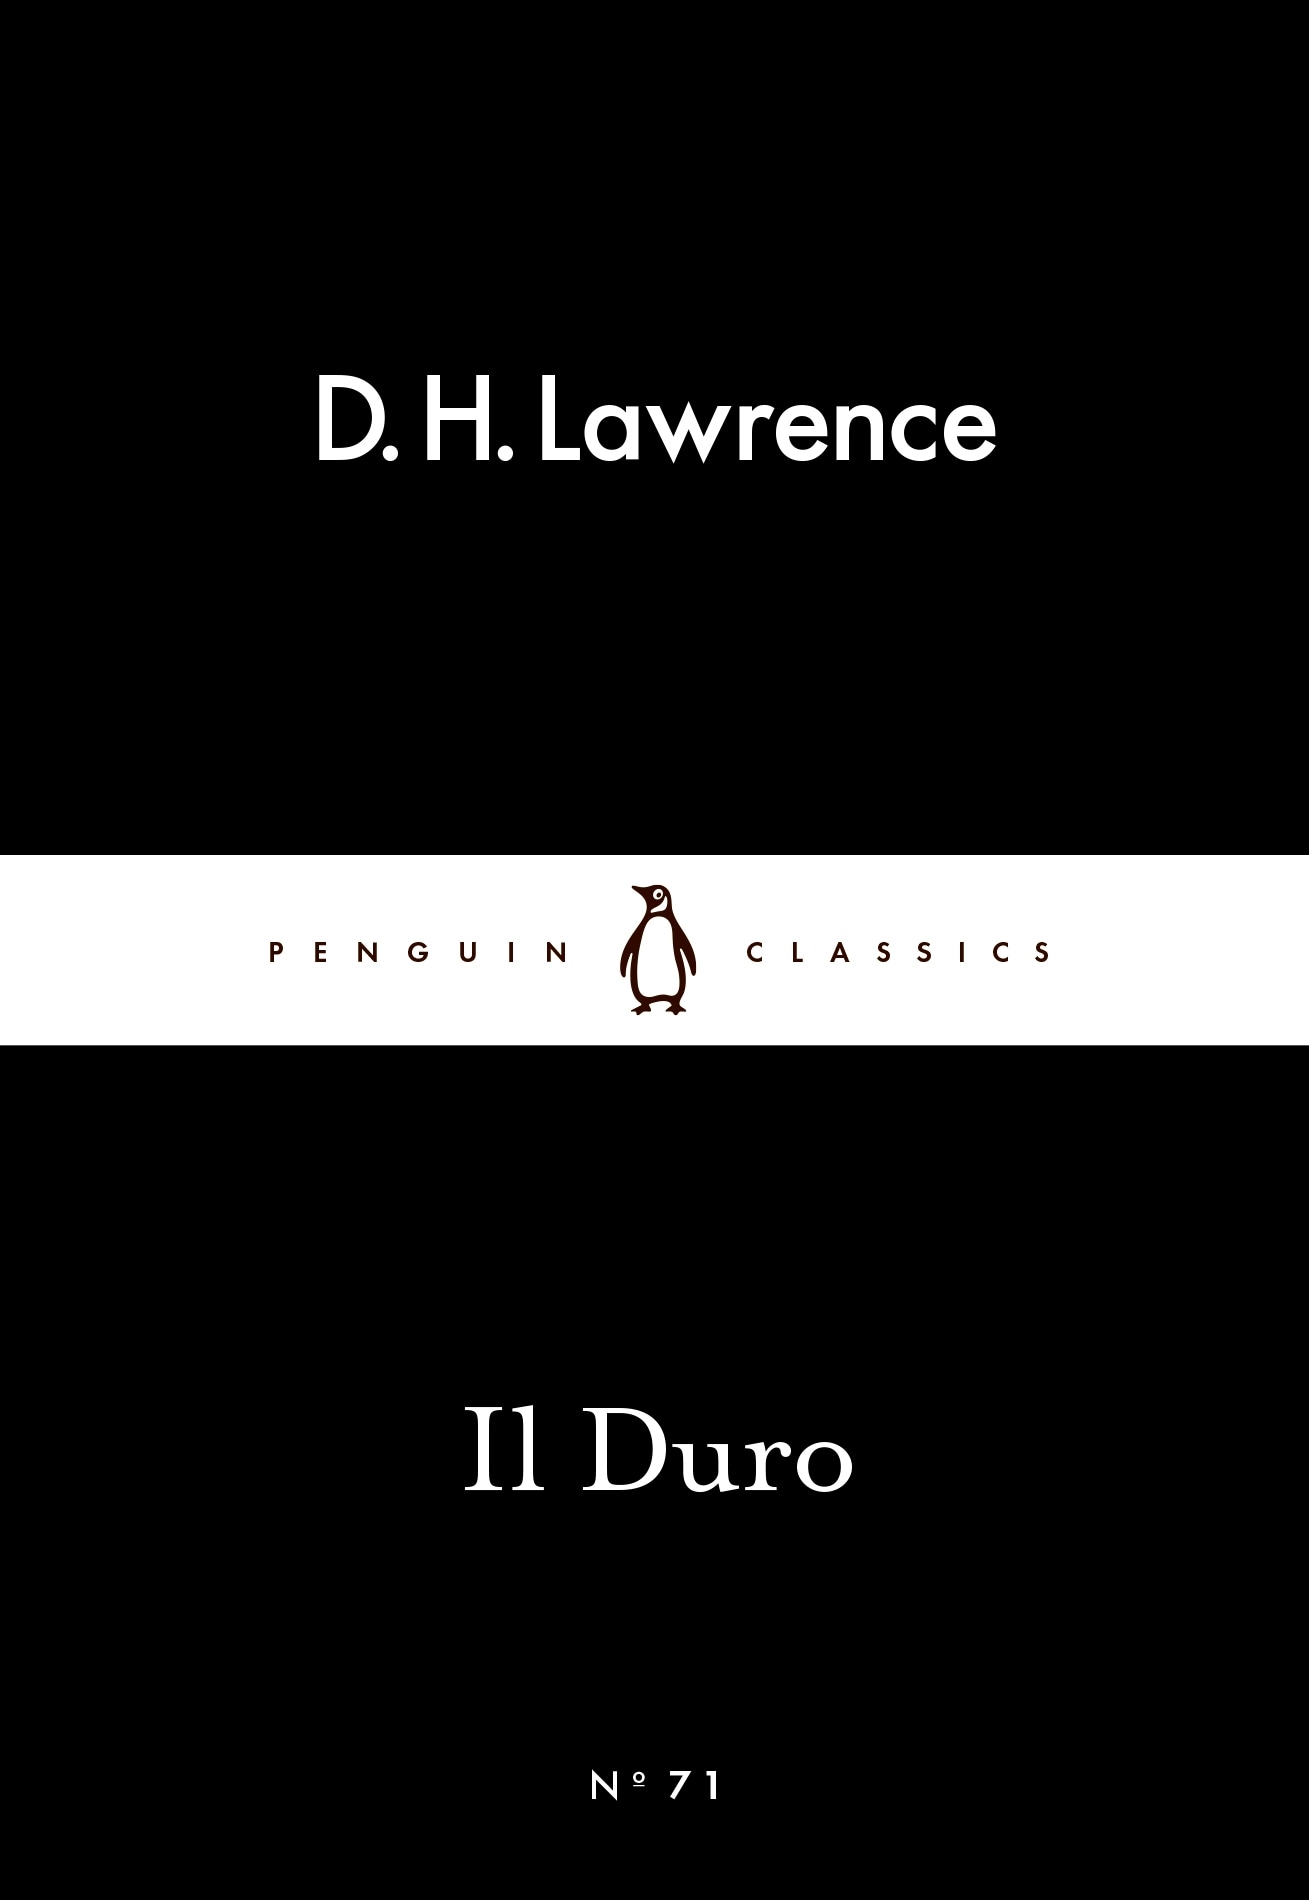 Book “Il Duro” by D H Lawrence — February 26, 2015